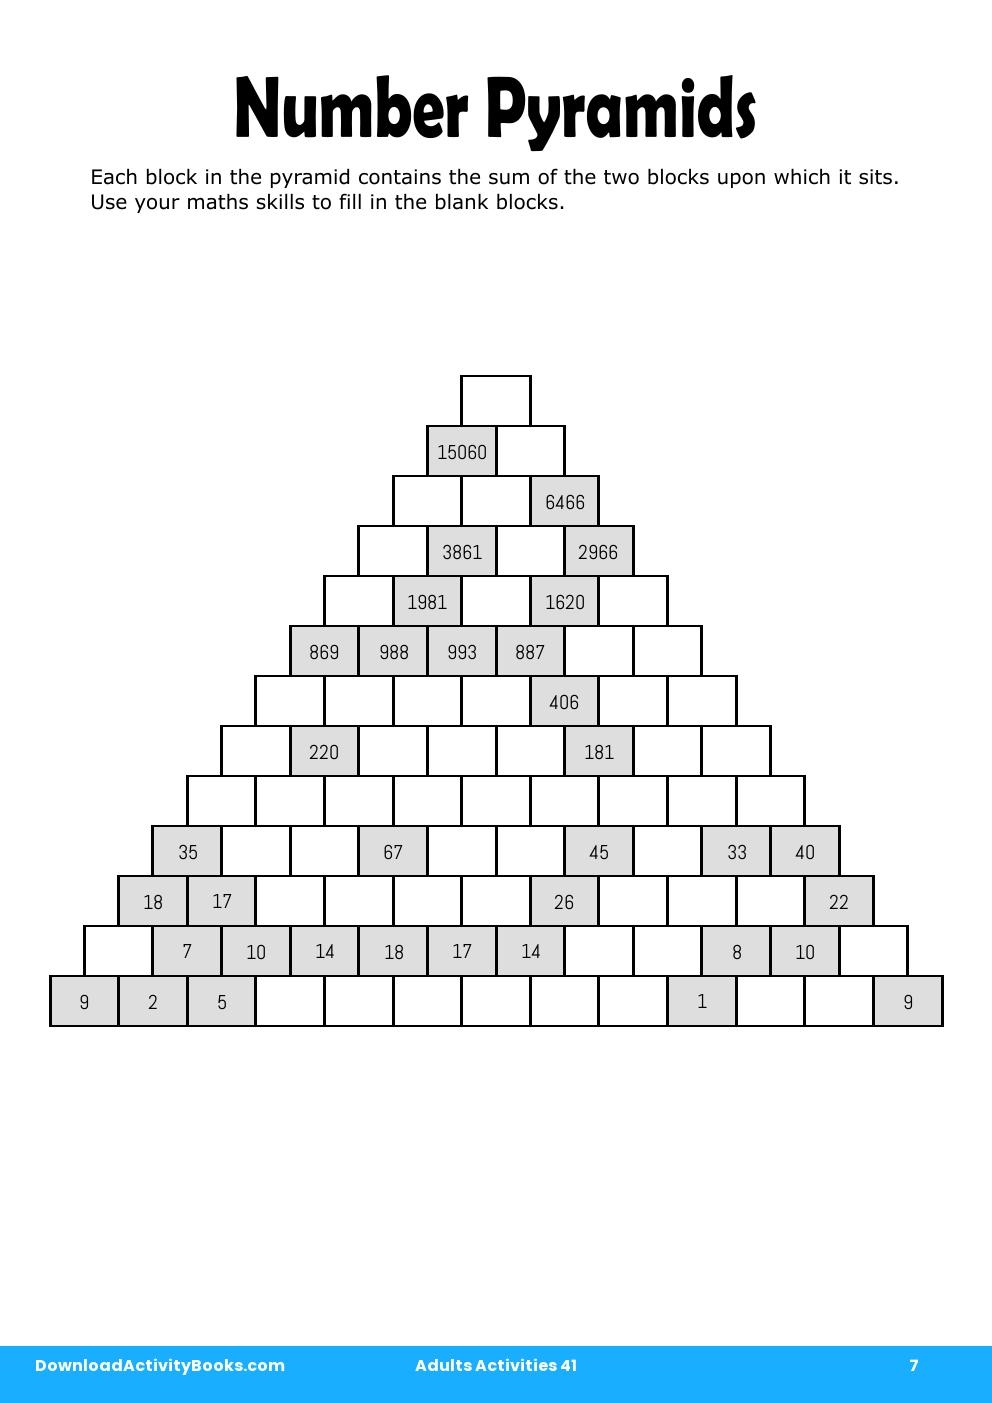 Number Pyramids in Adults Activities 41